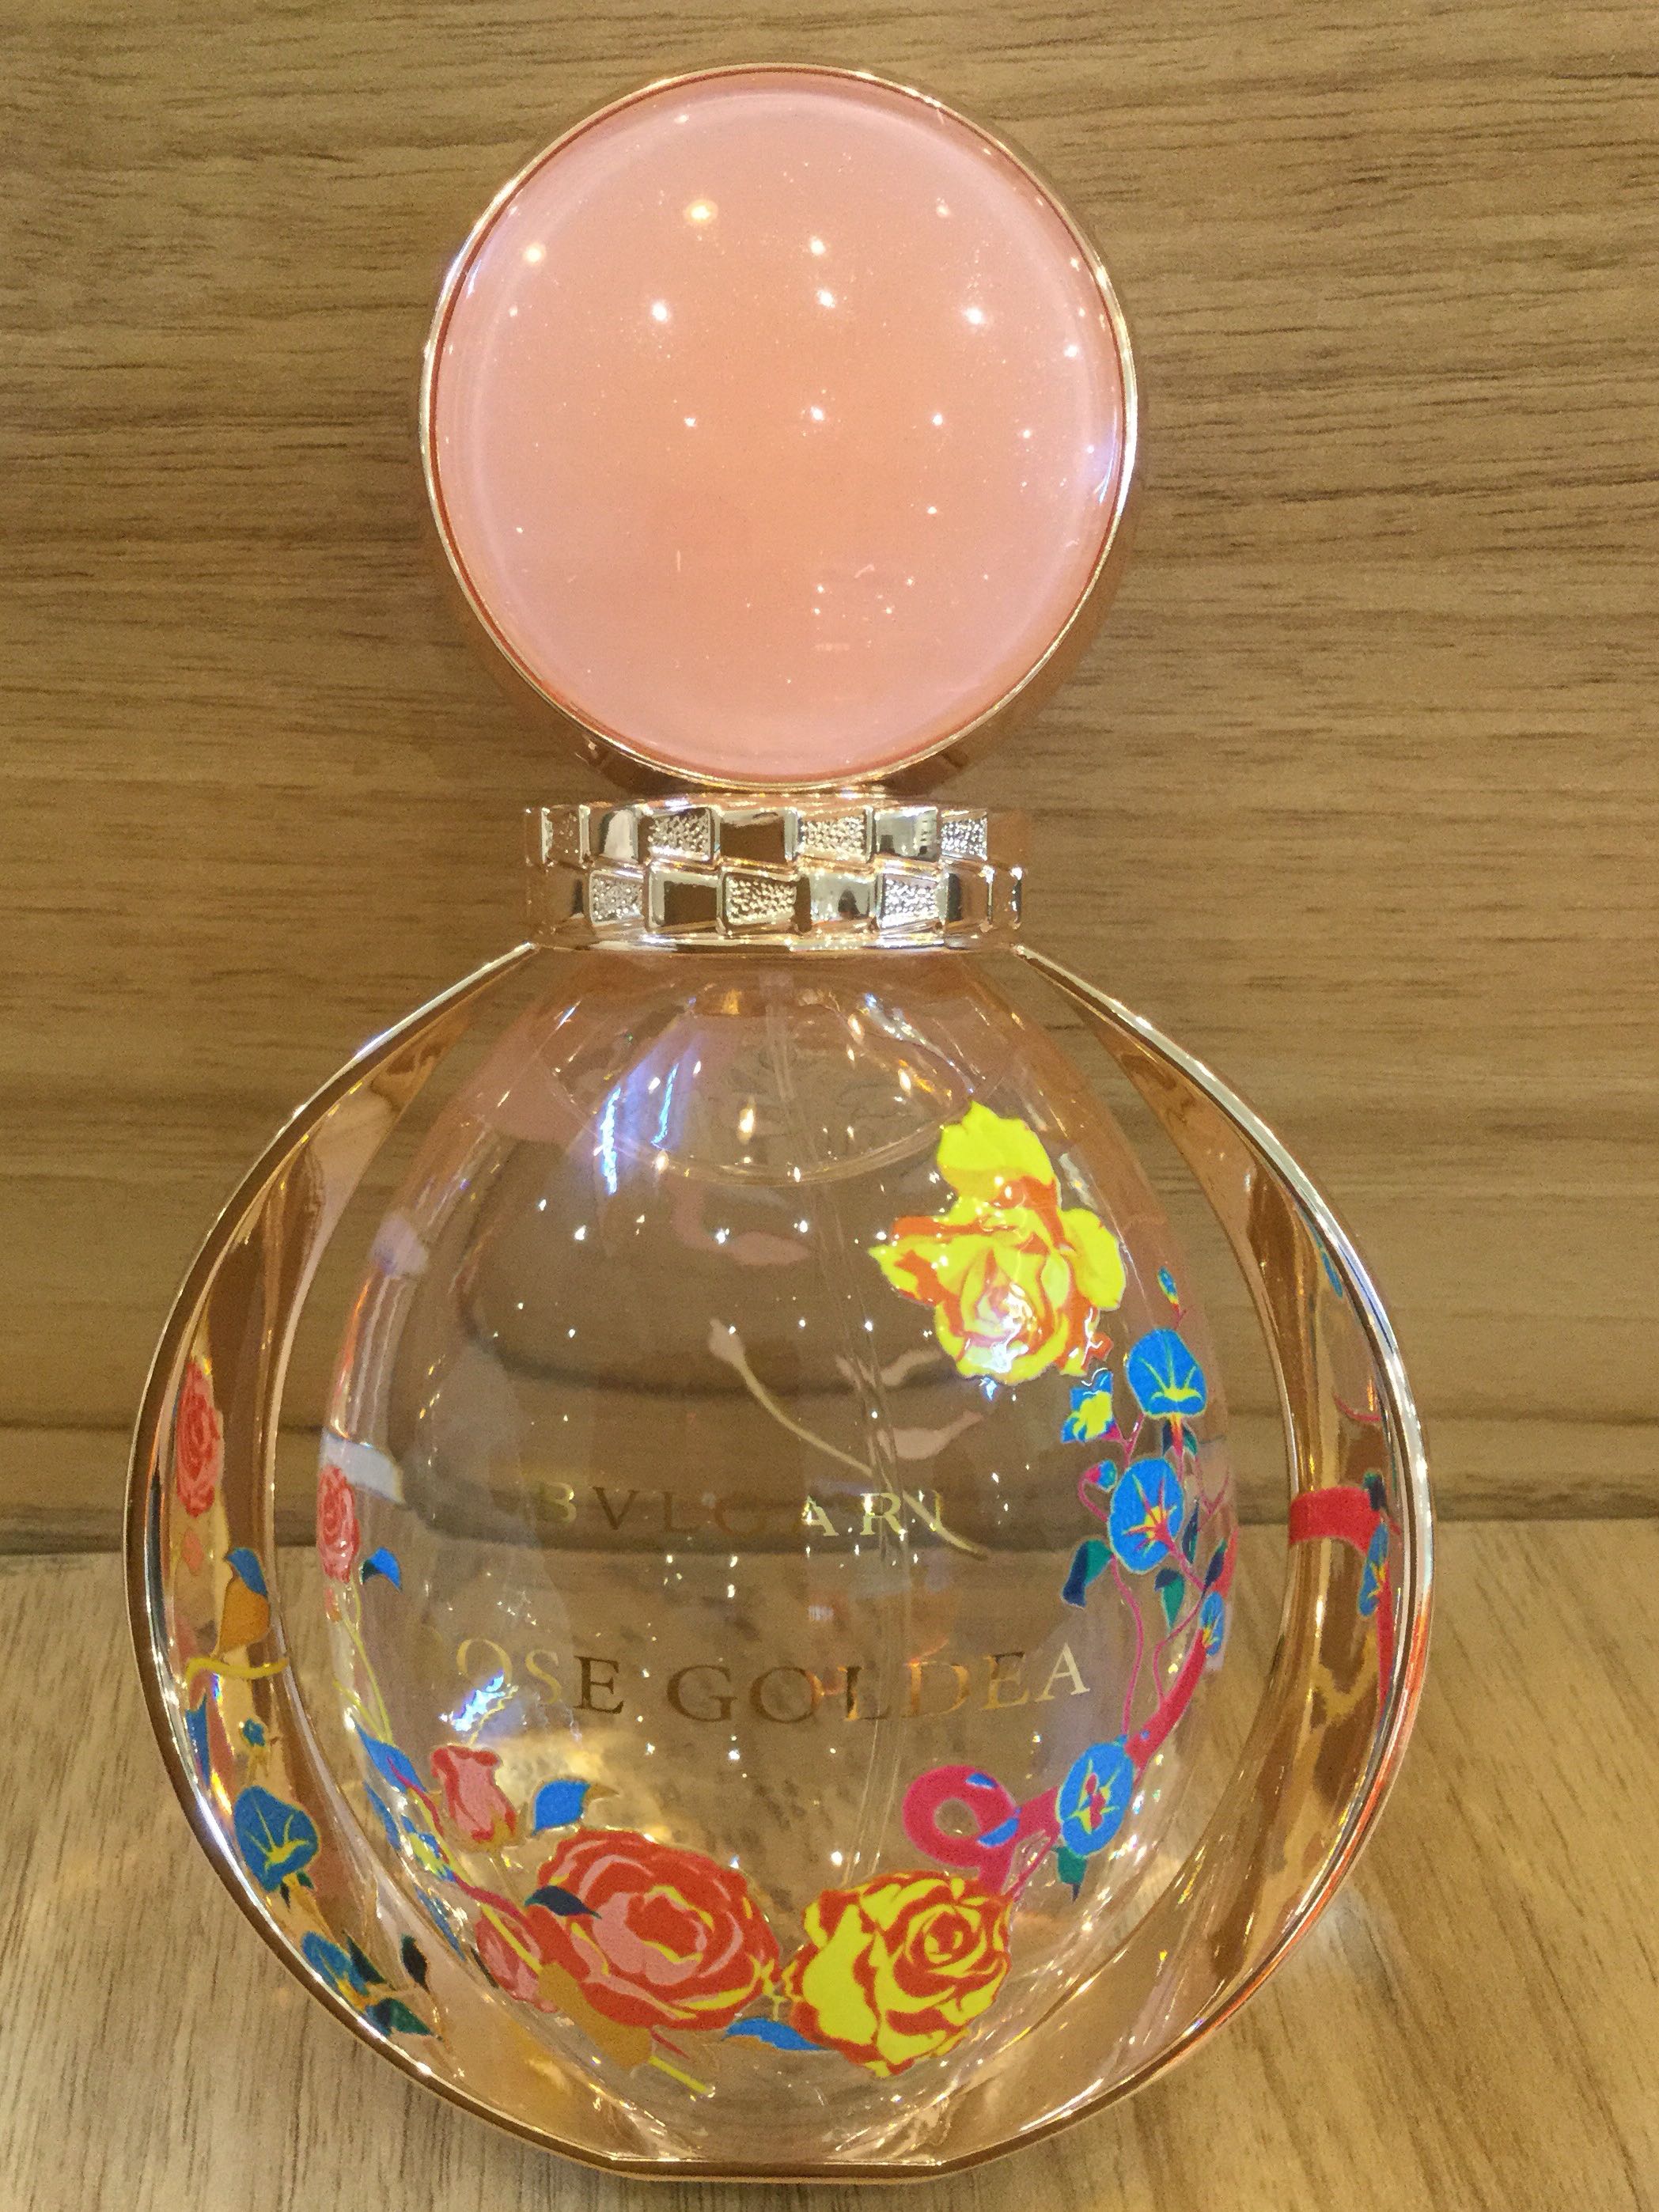 bvlgari rose goldea limited edition review